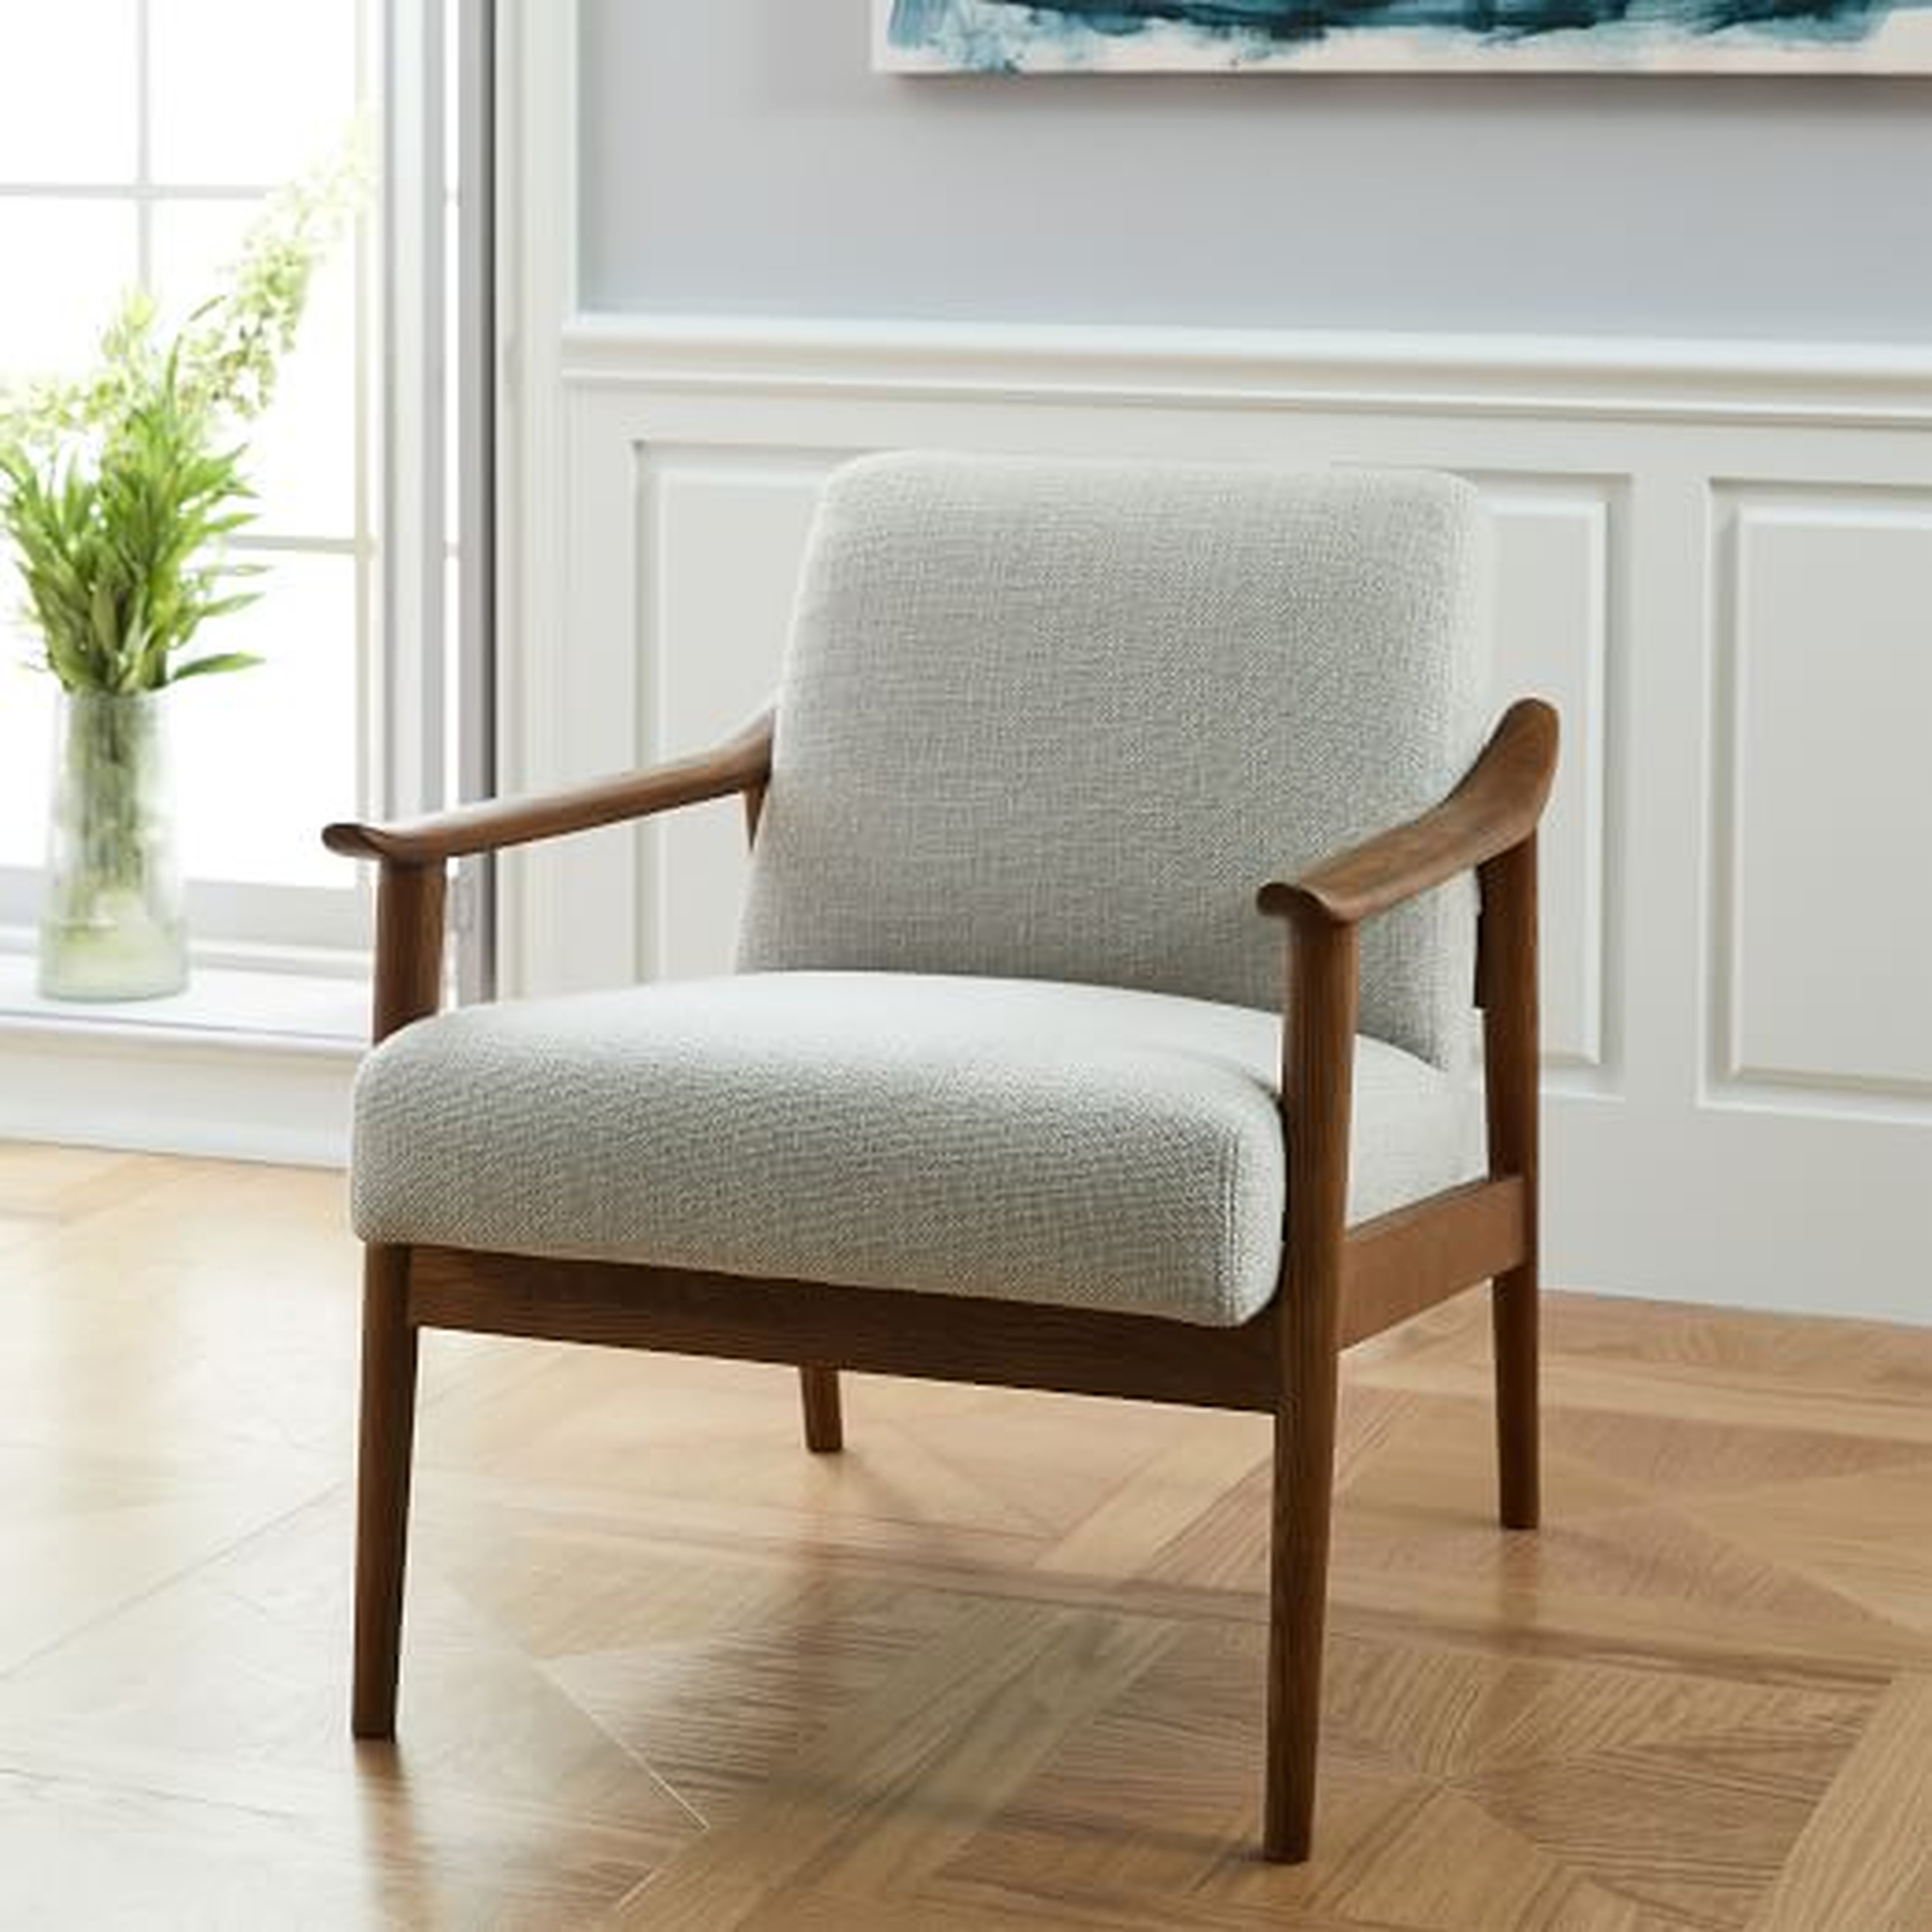 Mid-Century Show Wood Chair, Performance Basketweave, Natural - West Elm